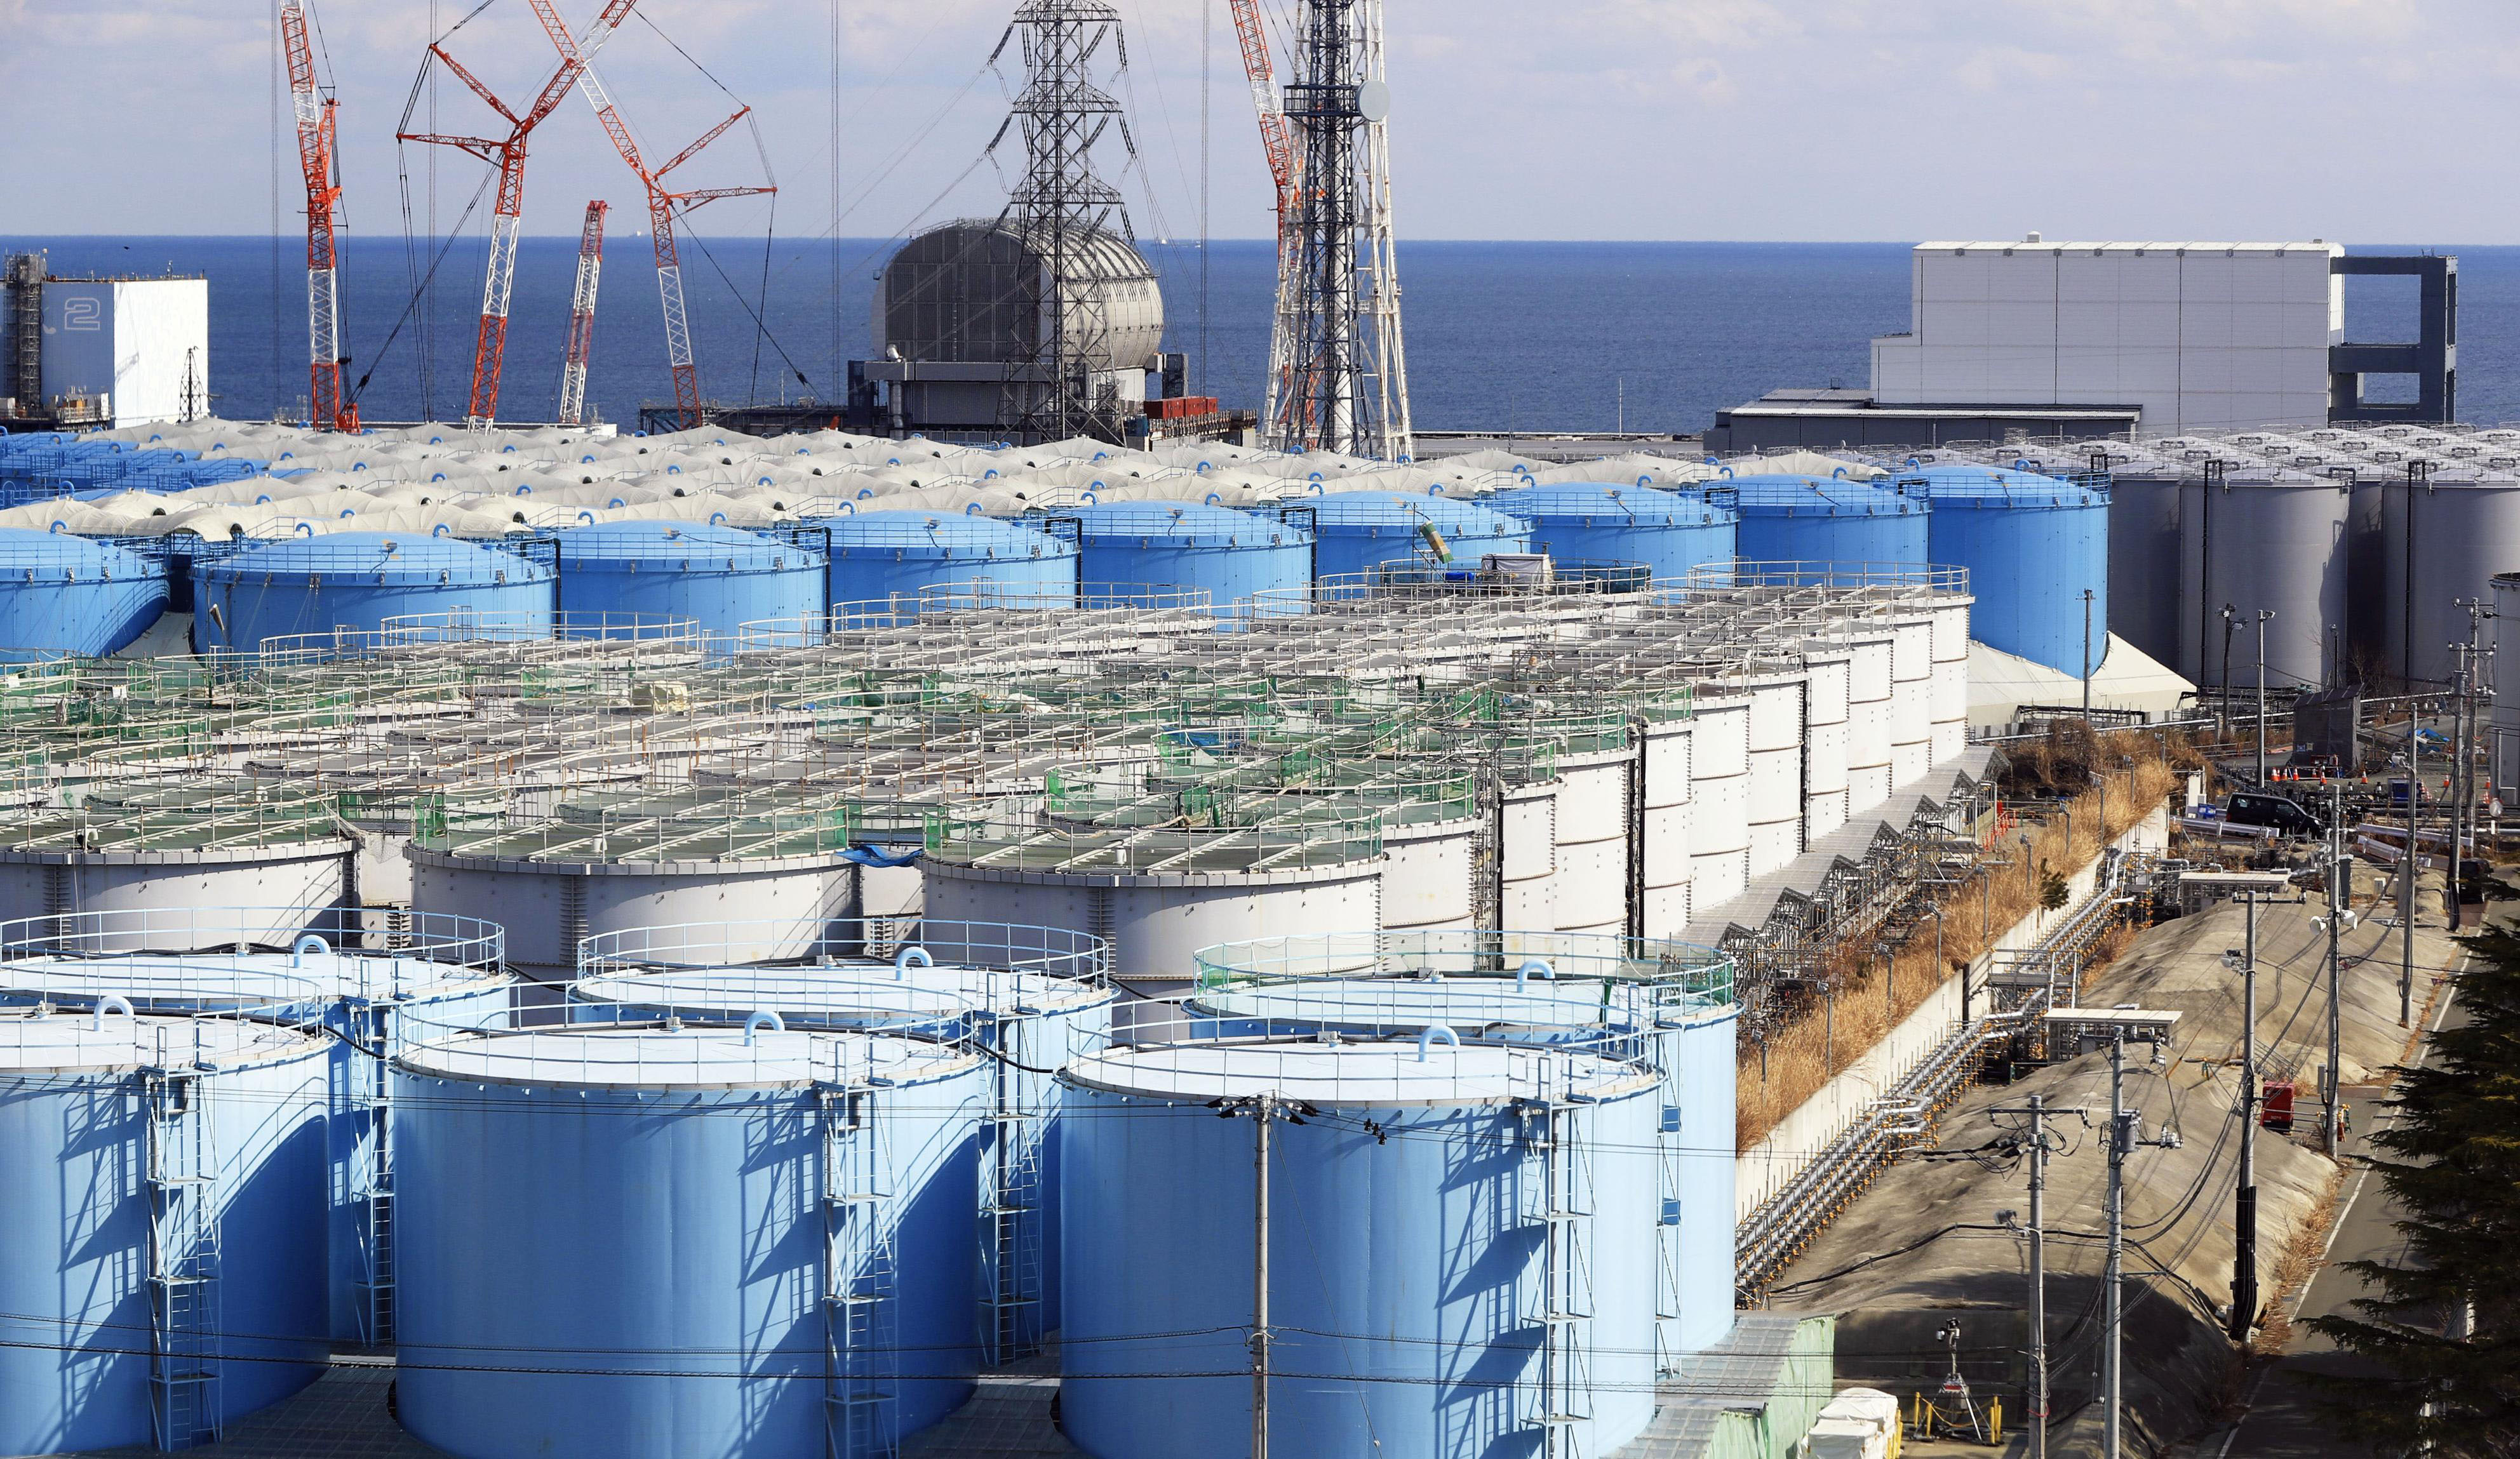 Contaminated water is stored in tanks at the Fukushima No. 1 nuclear power plant in Okuma, Fukushima Prefecture, in February. | POOL / VIA KYODO